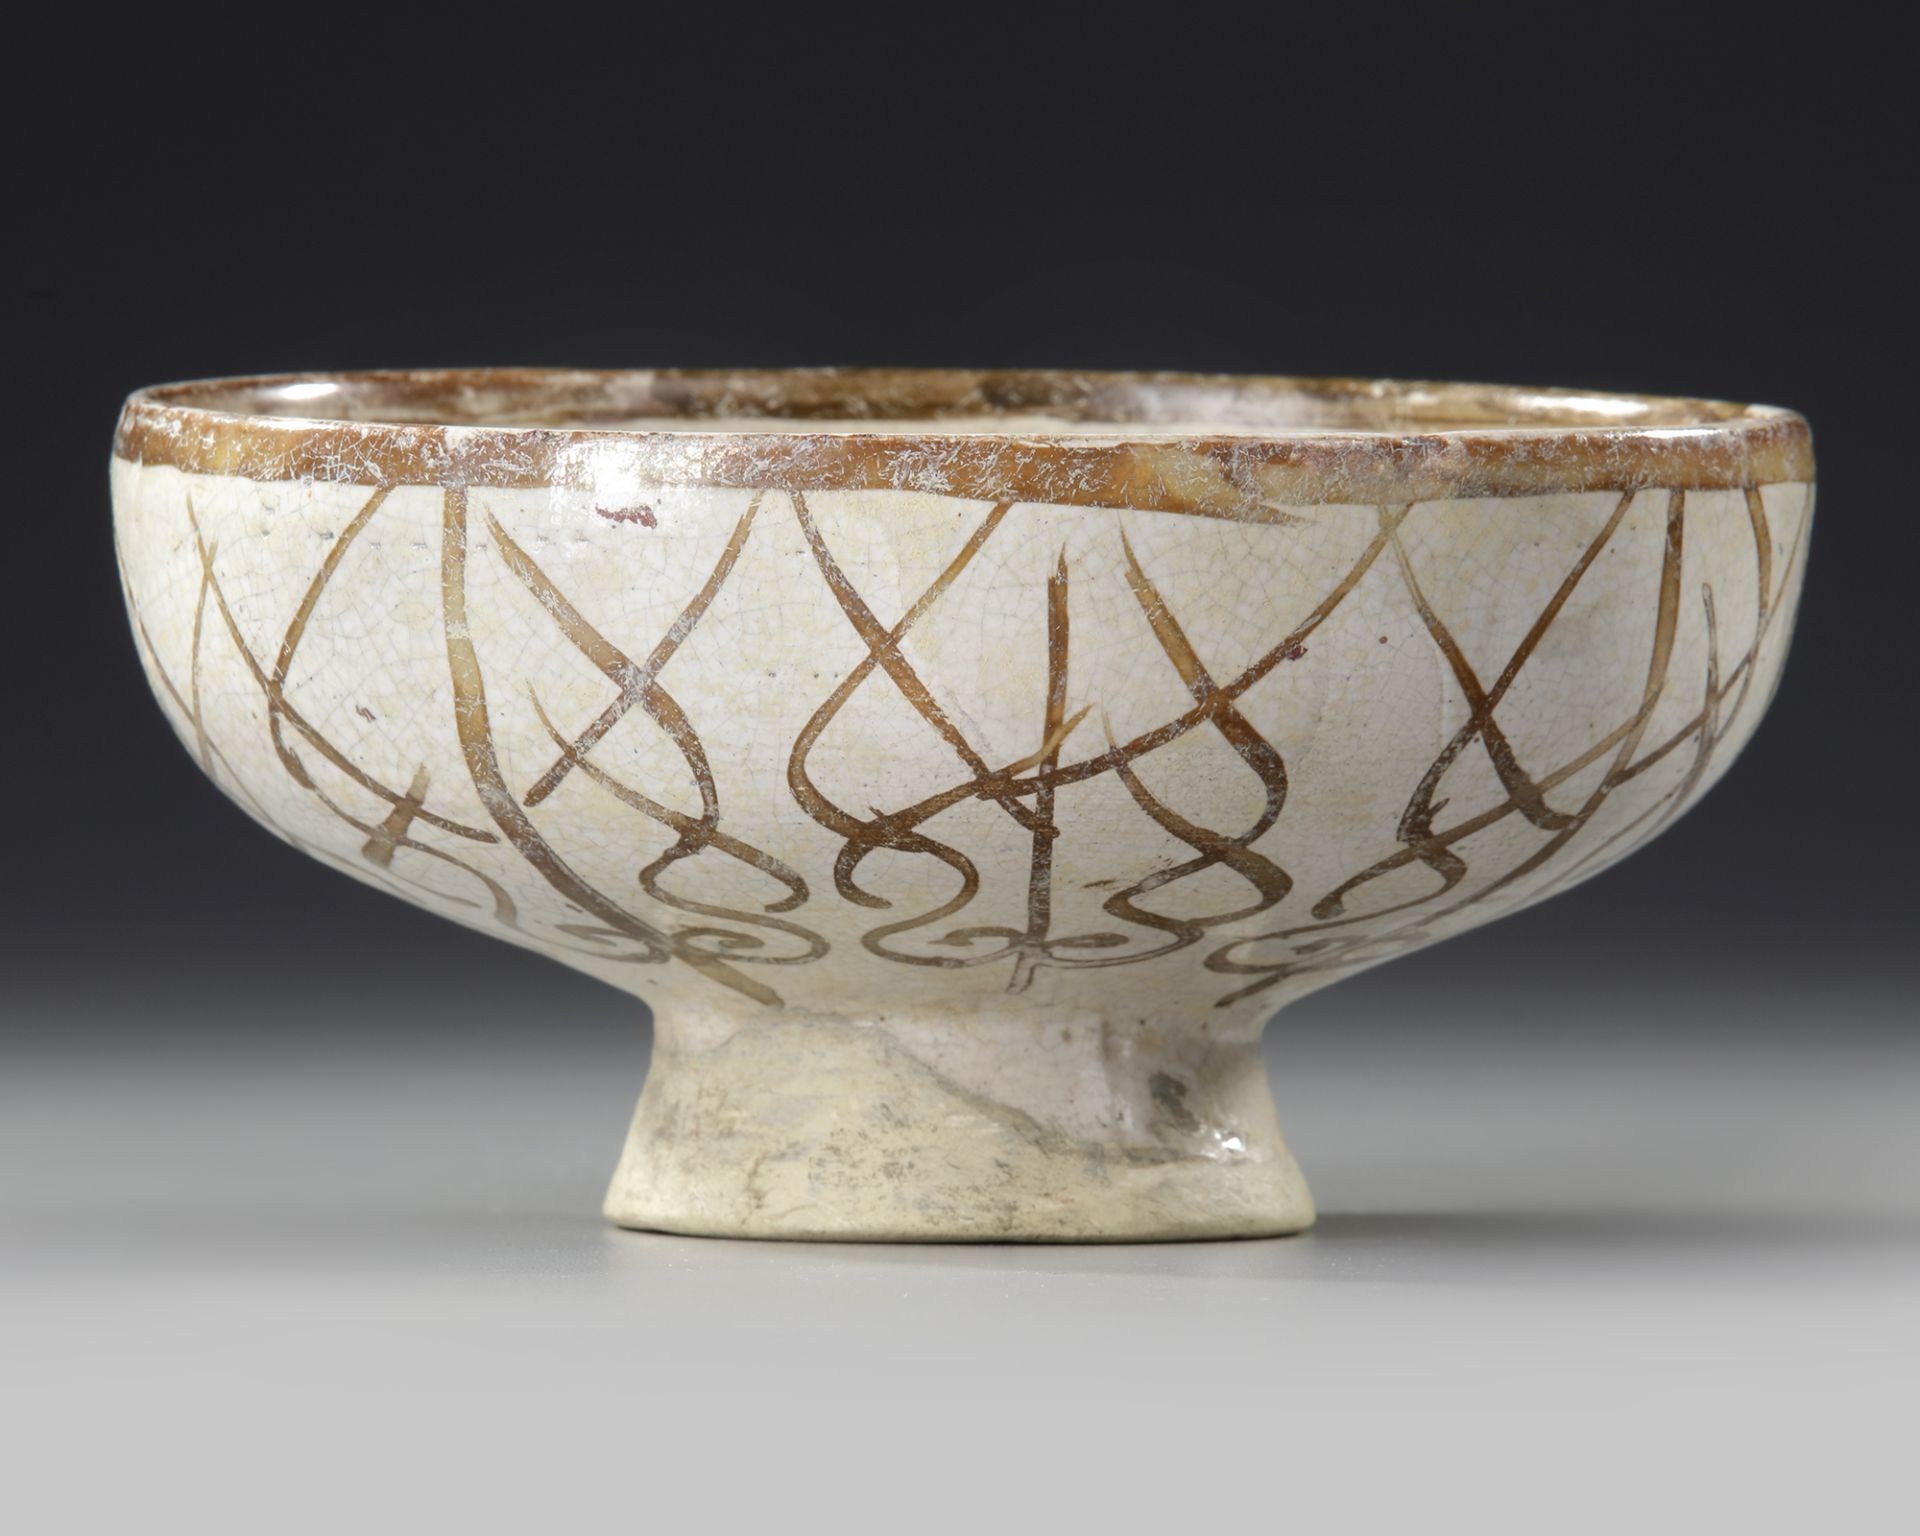 A KASHAN LUSTRE POTTERY BOWL, PERSIA, LATE 12TH EARLY 13TH CENTURY - Image 2 of 4